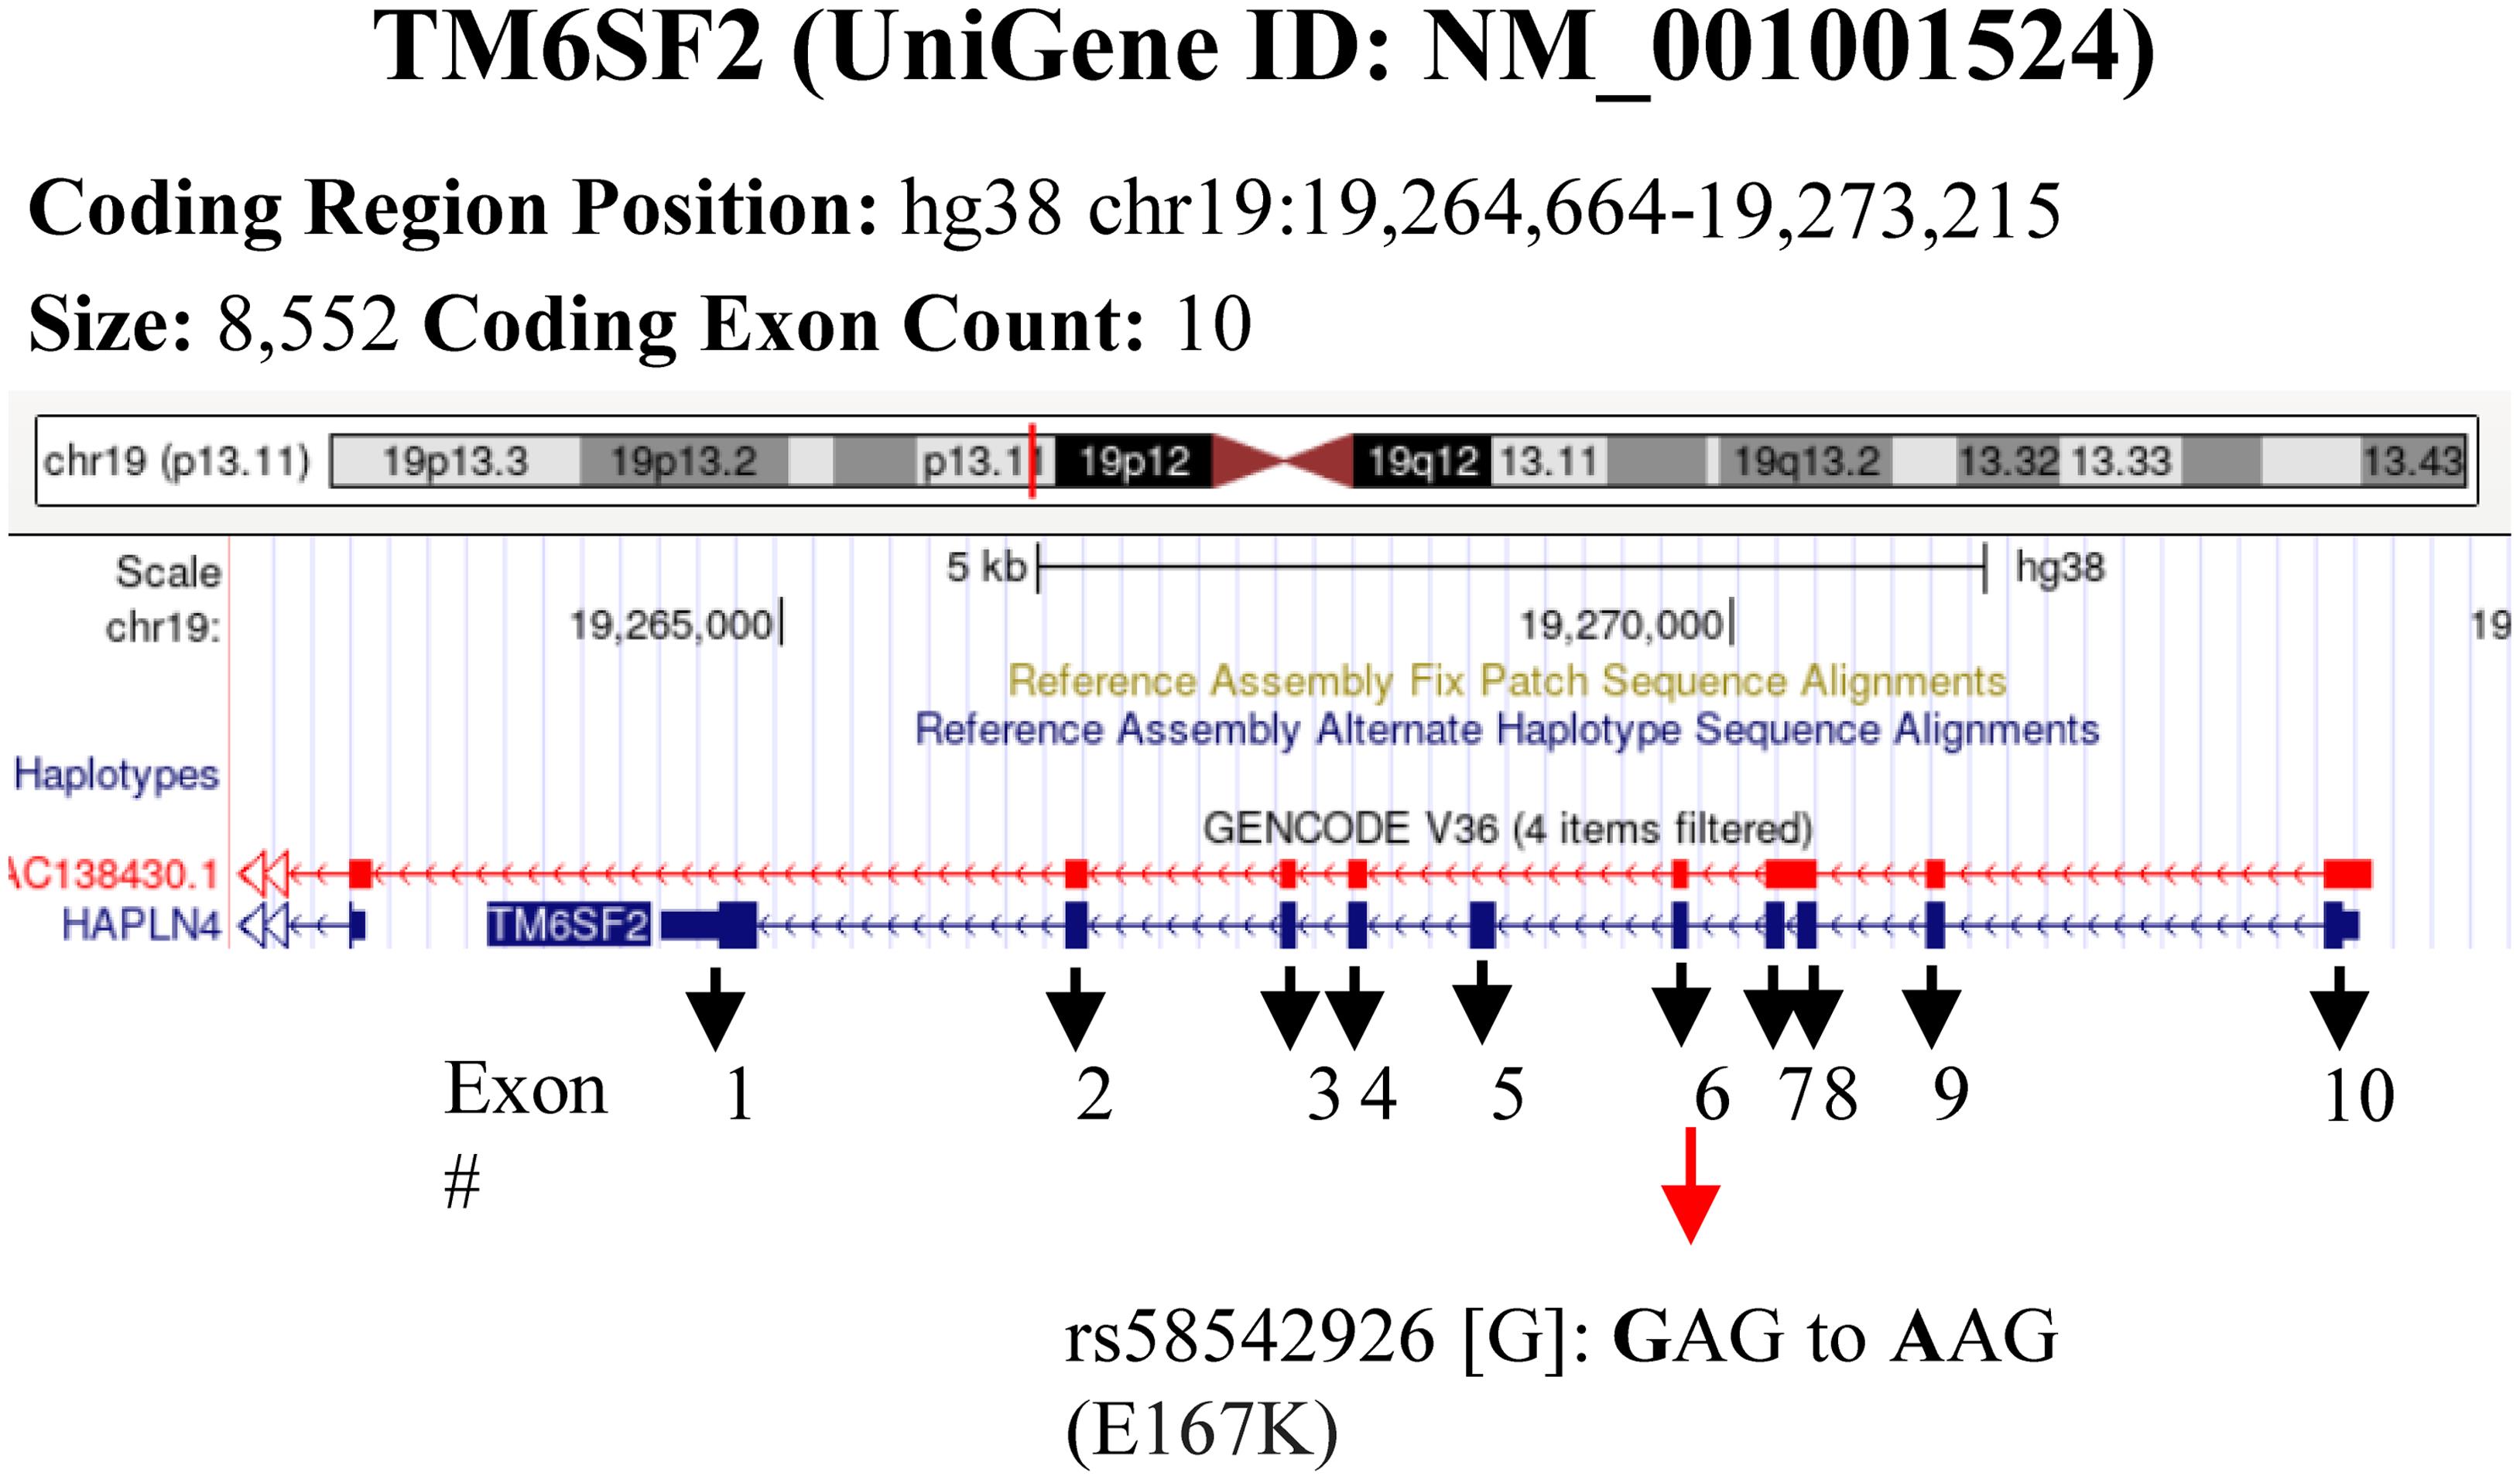 TM6SF2 gene locus showing the rs58542926 polymorphism.